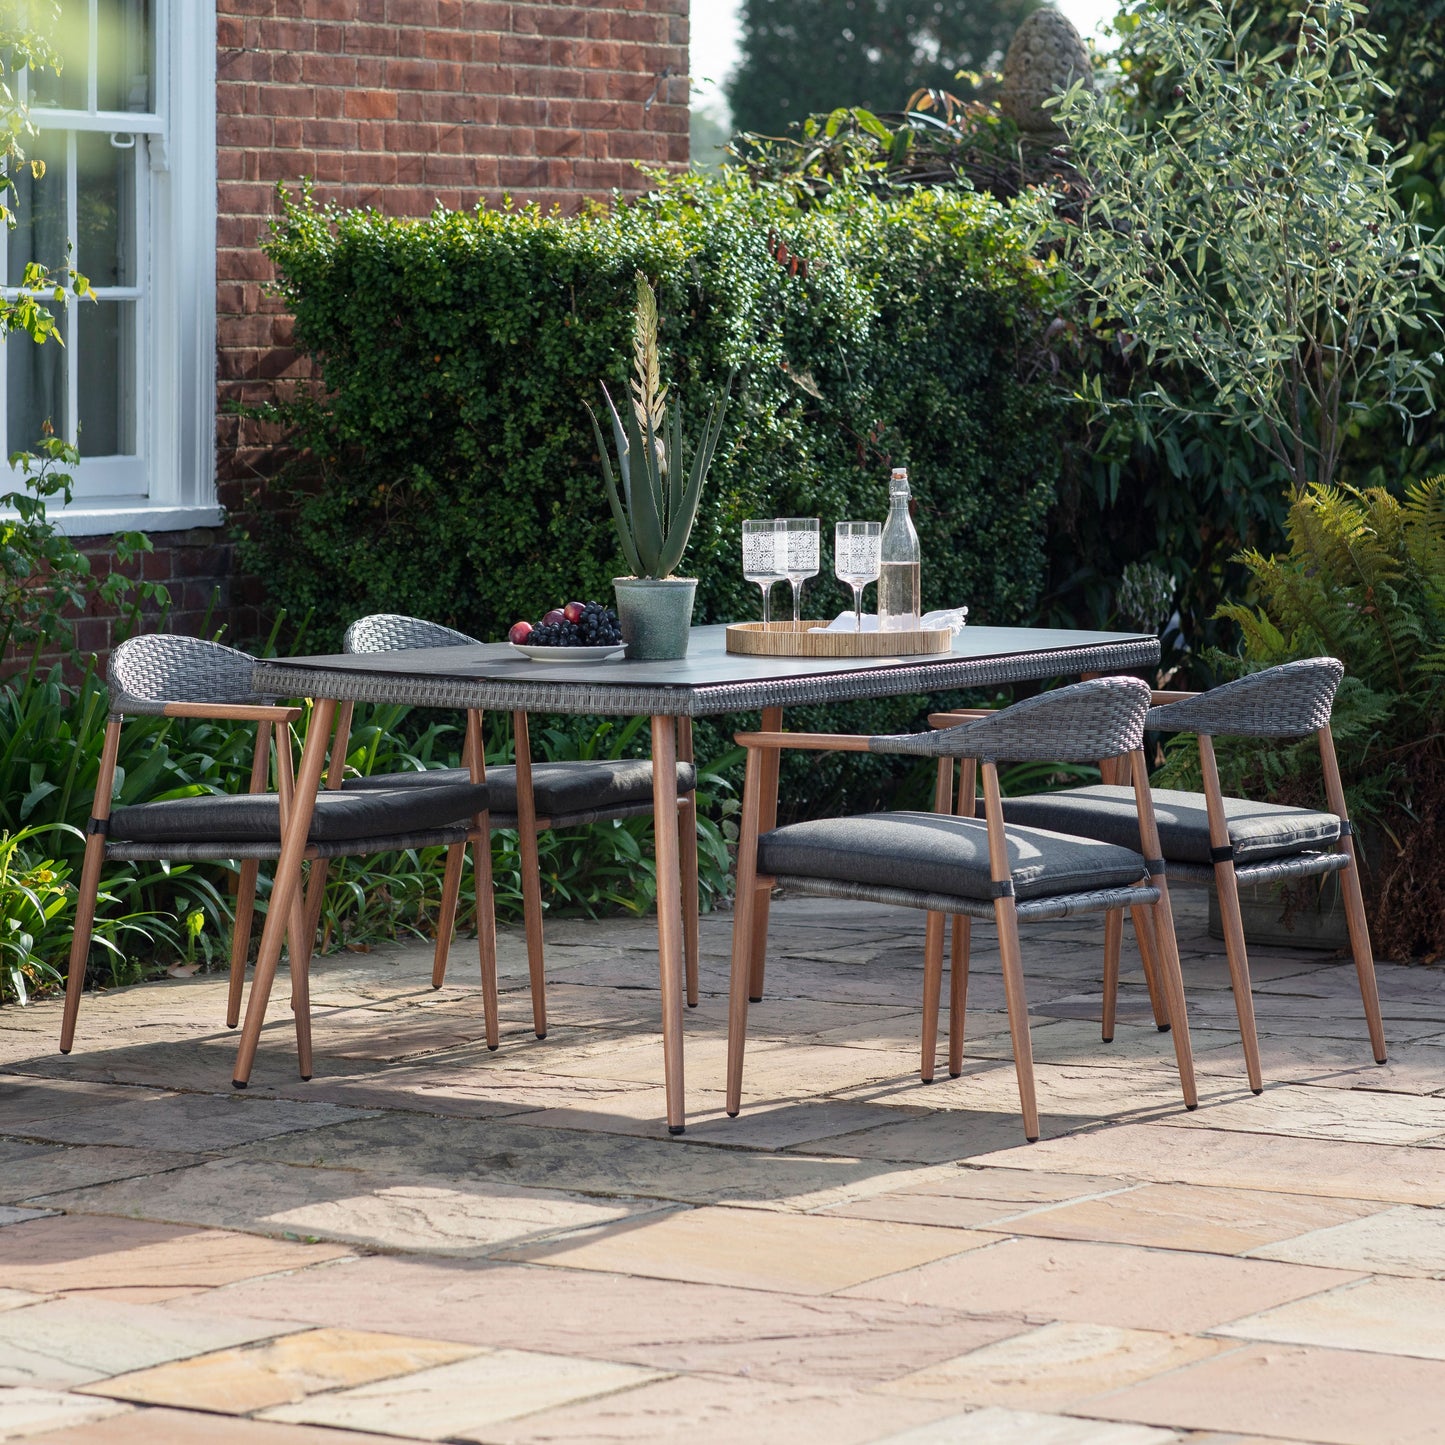 An Kilmington 4 Seater Dining Set by Kikiathome.co.uk that enhances the patio's interior decor with home furniture.